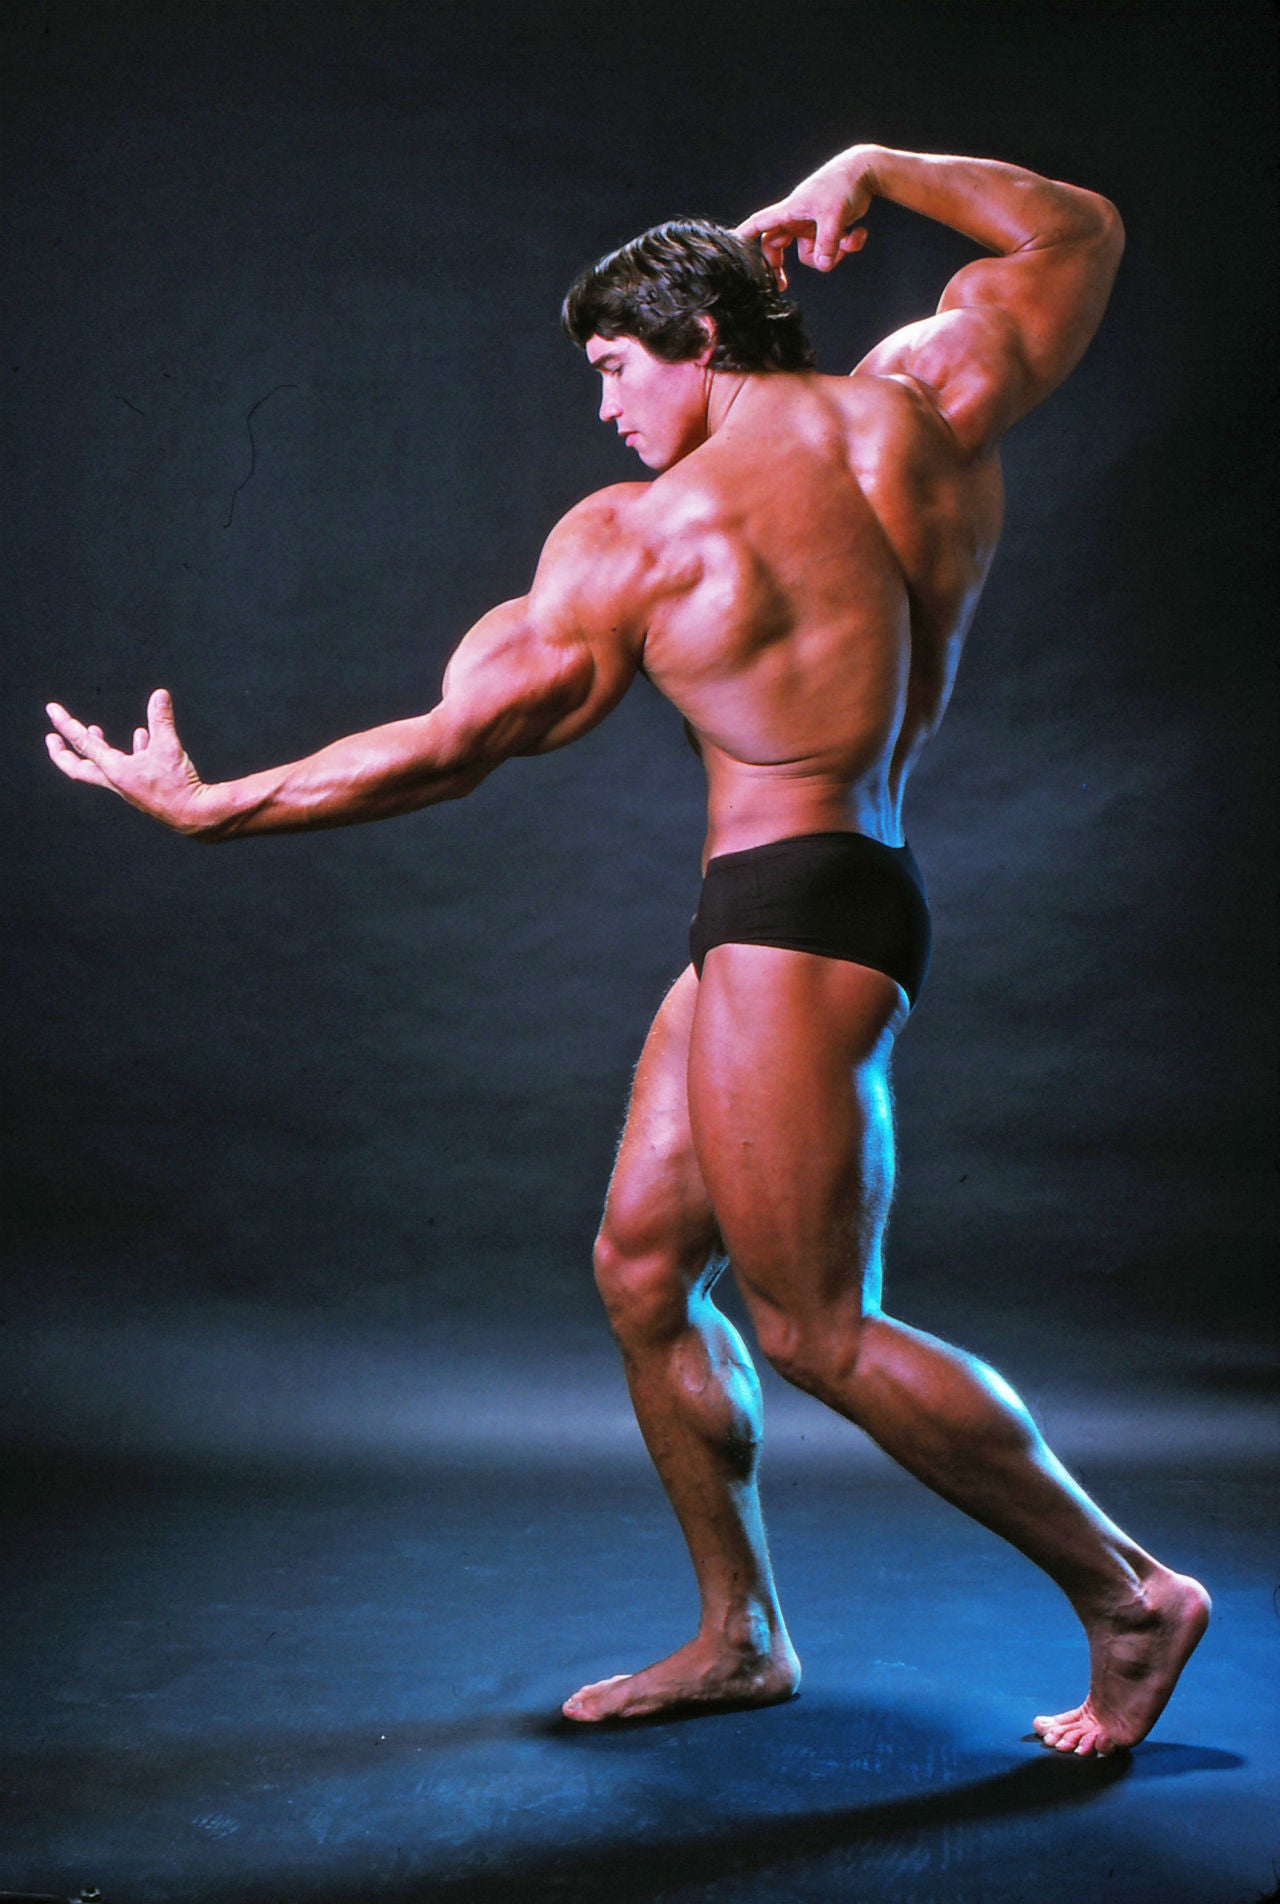 The Definitive Guide on How to Lat Spread Like a Pro Bodybuilder | BarBend